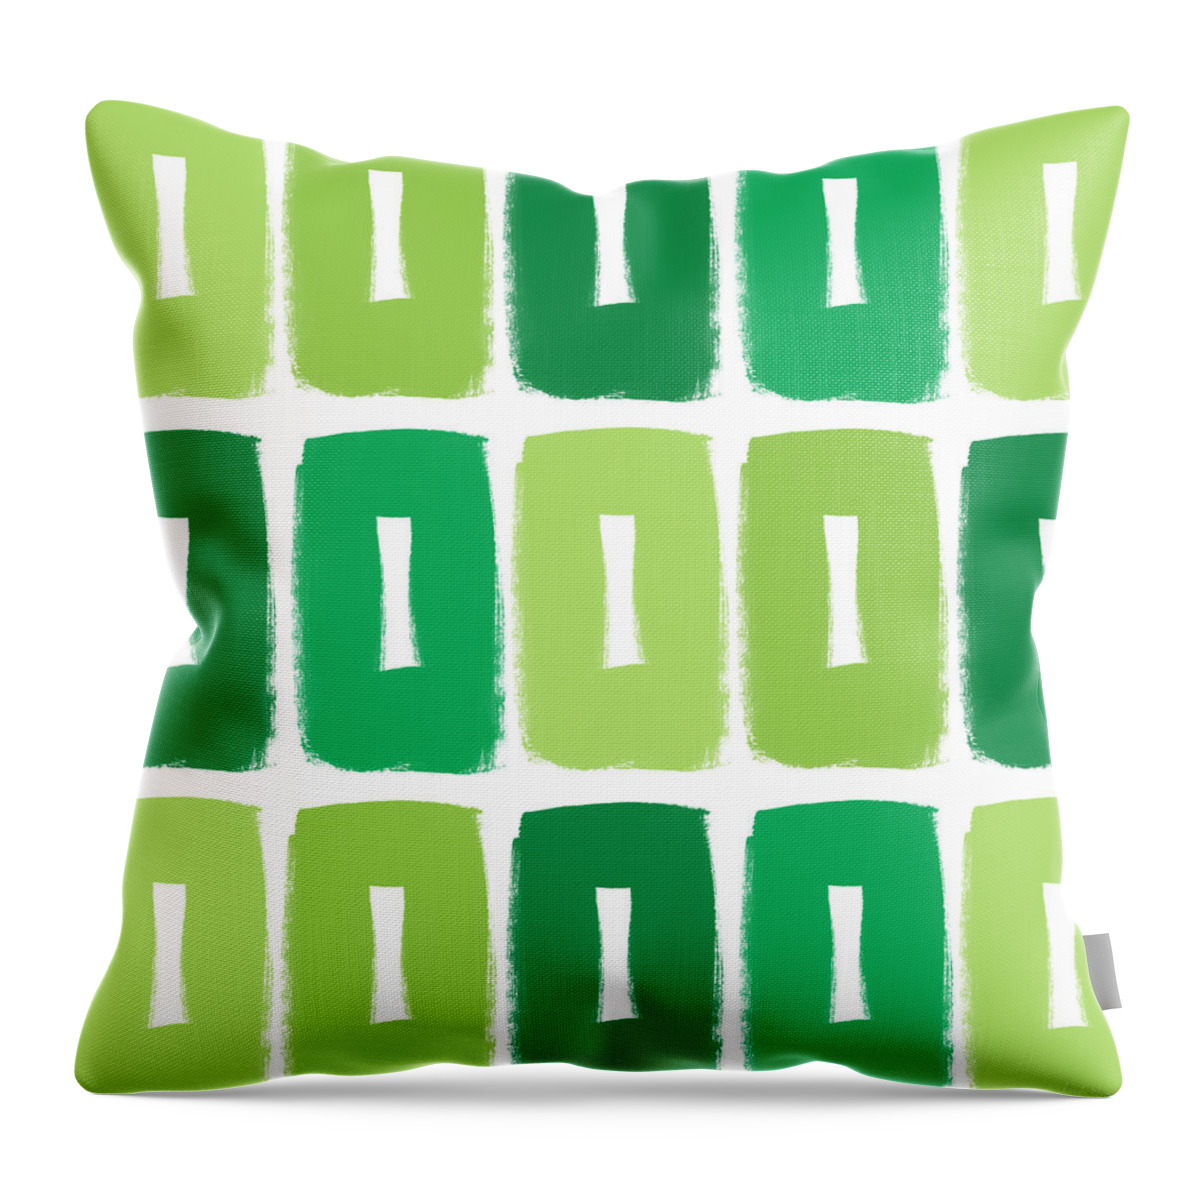 Green Throw Pillow featuring the painting Green Boxes- Art by Linda Woods by Linda Woods